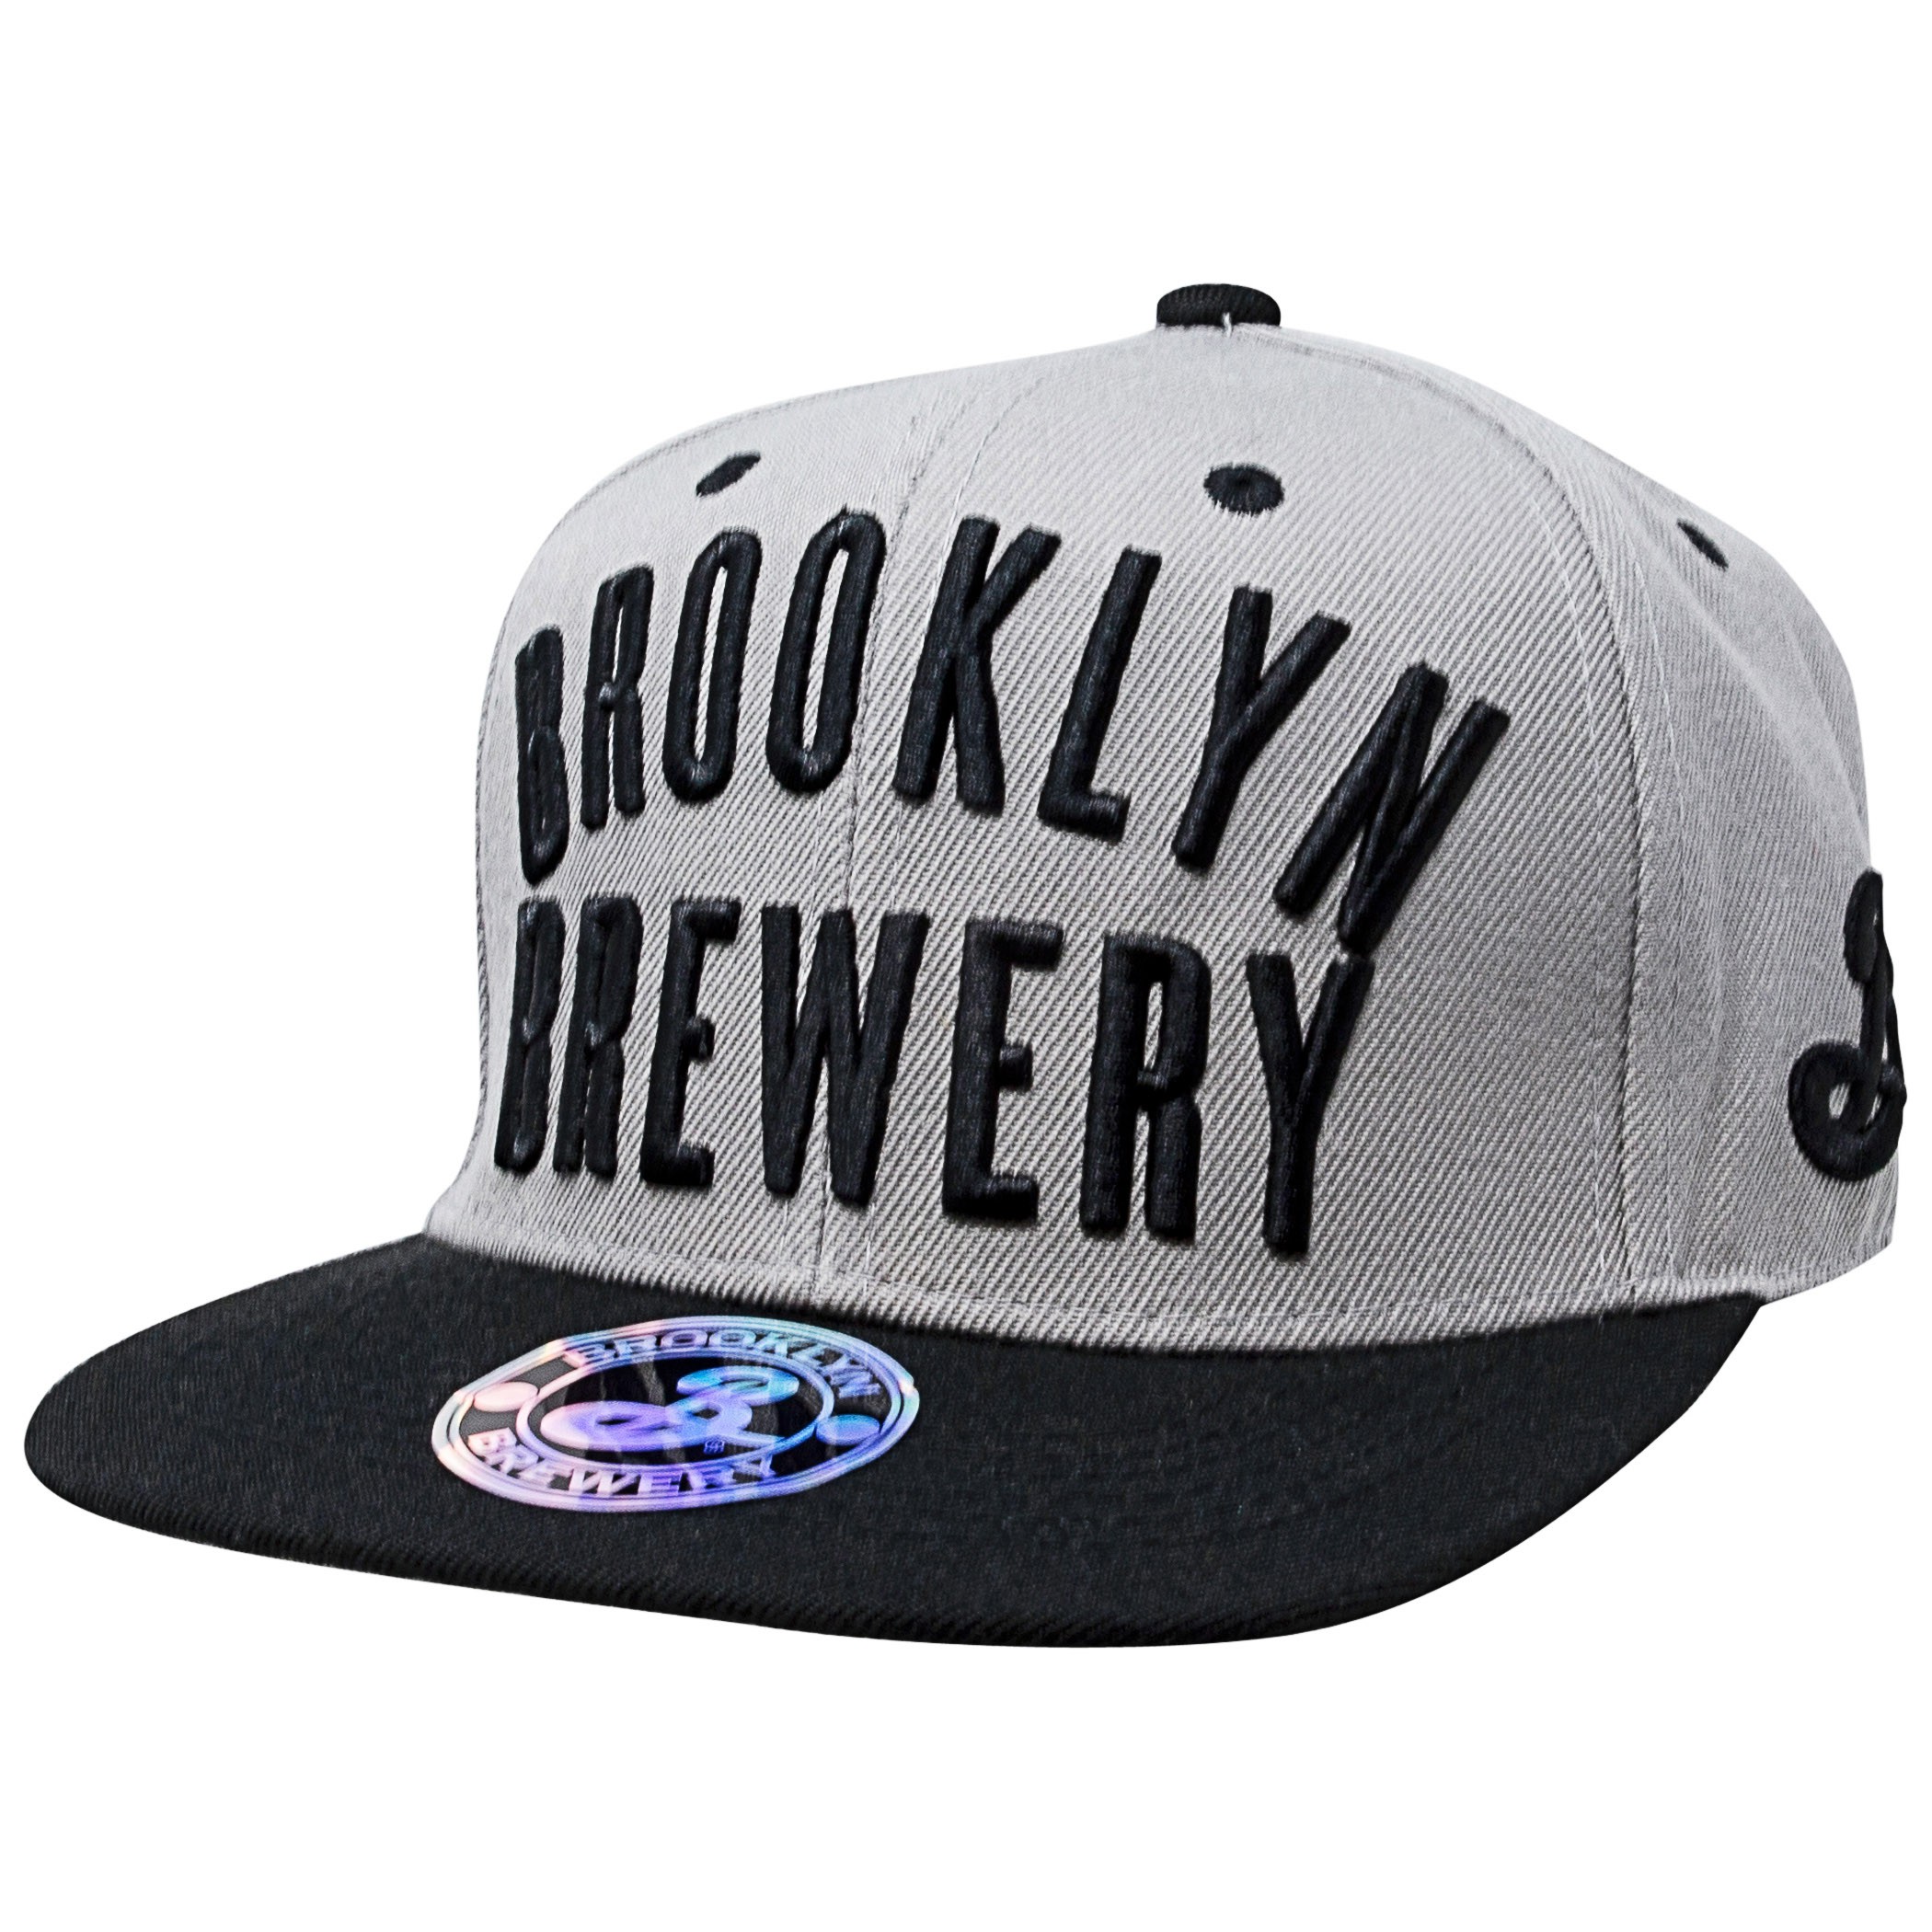 Brooklyn Brewery Spell Out Snapback Hat